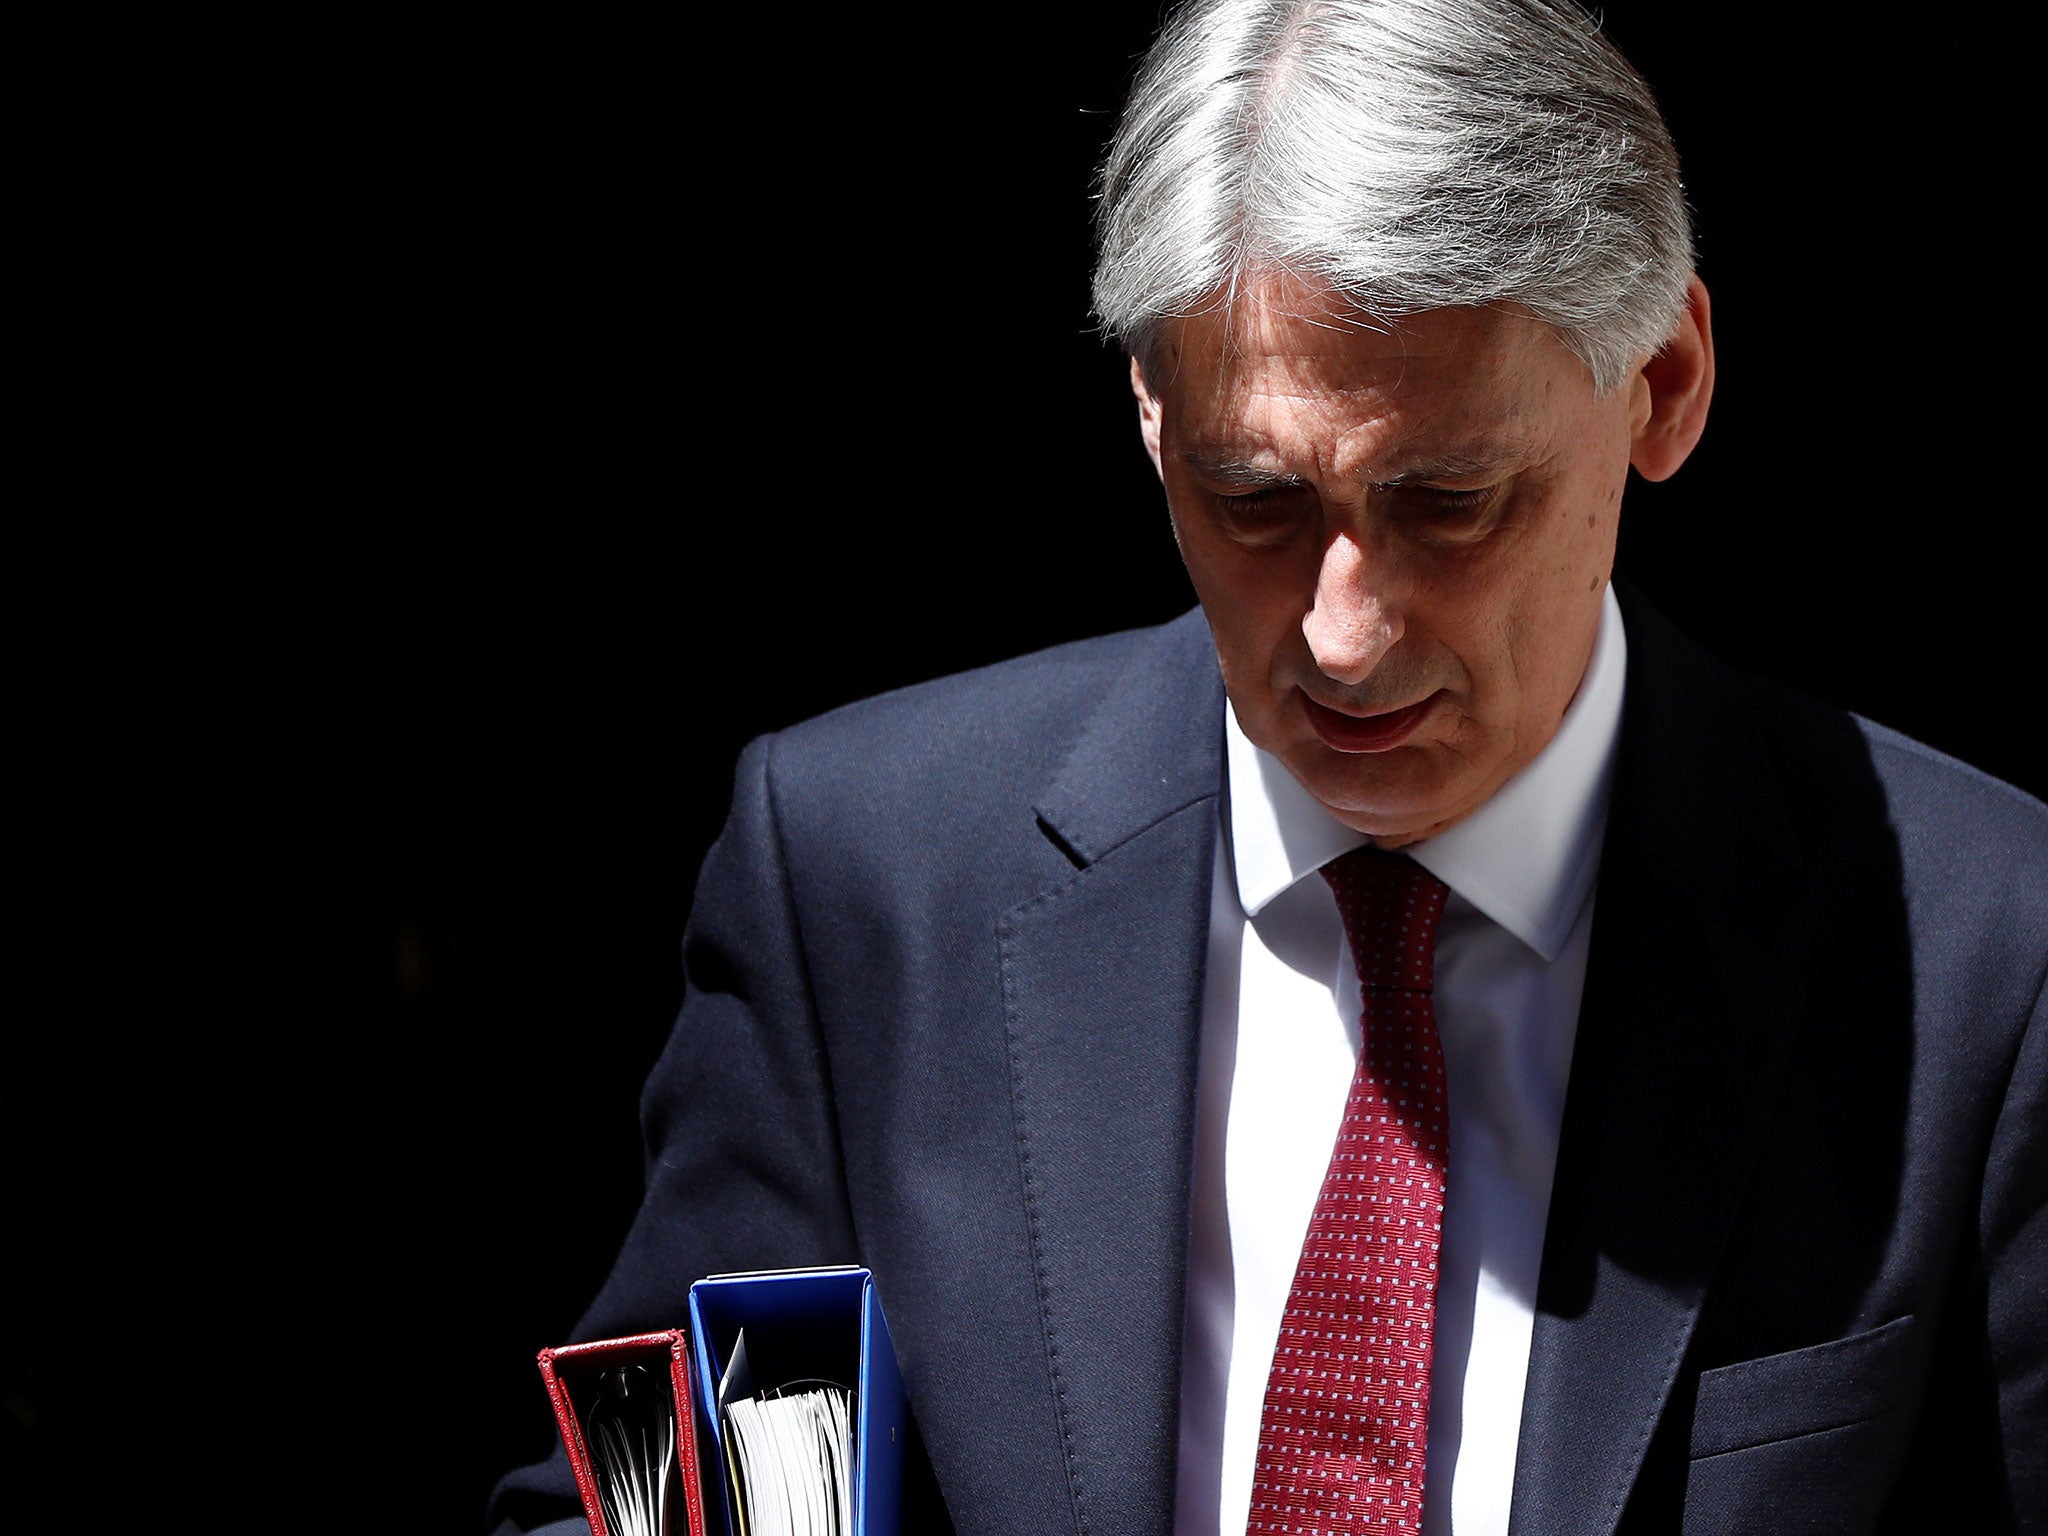 The challenge for the Chancellor: the deficit in June stood at £6.8bn, up 43 per cent compared with last year